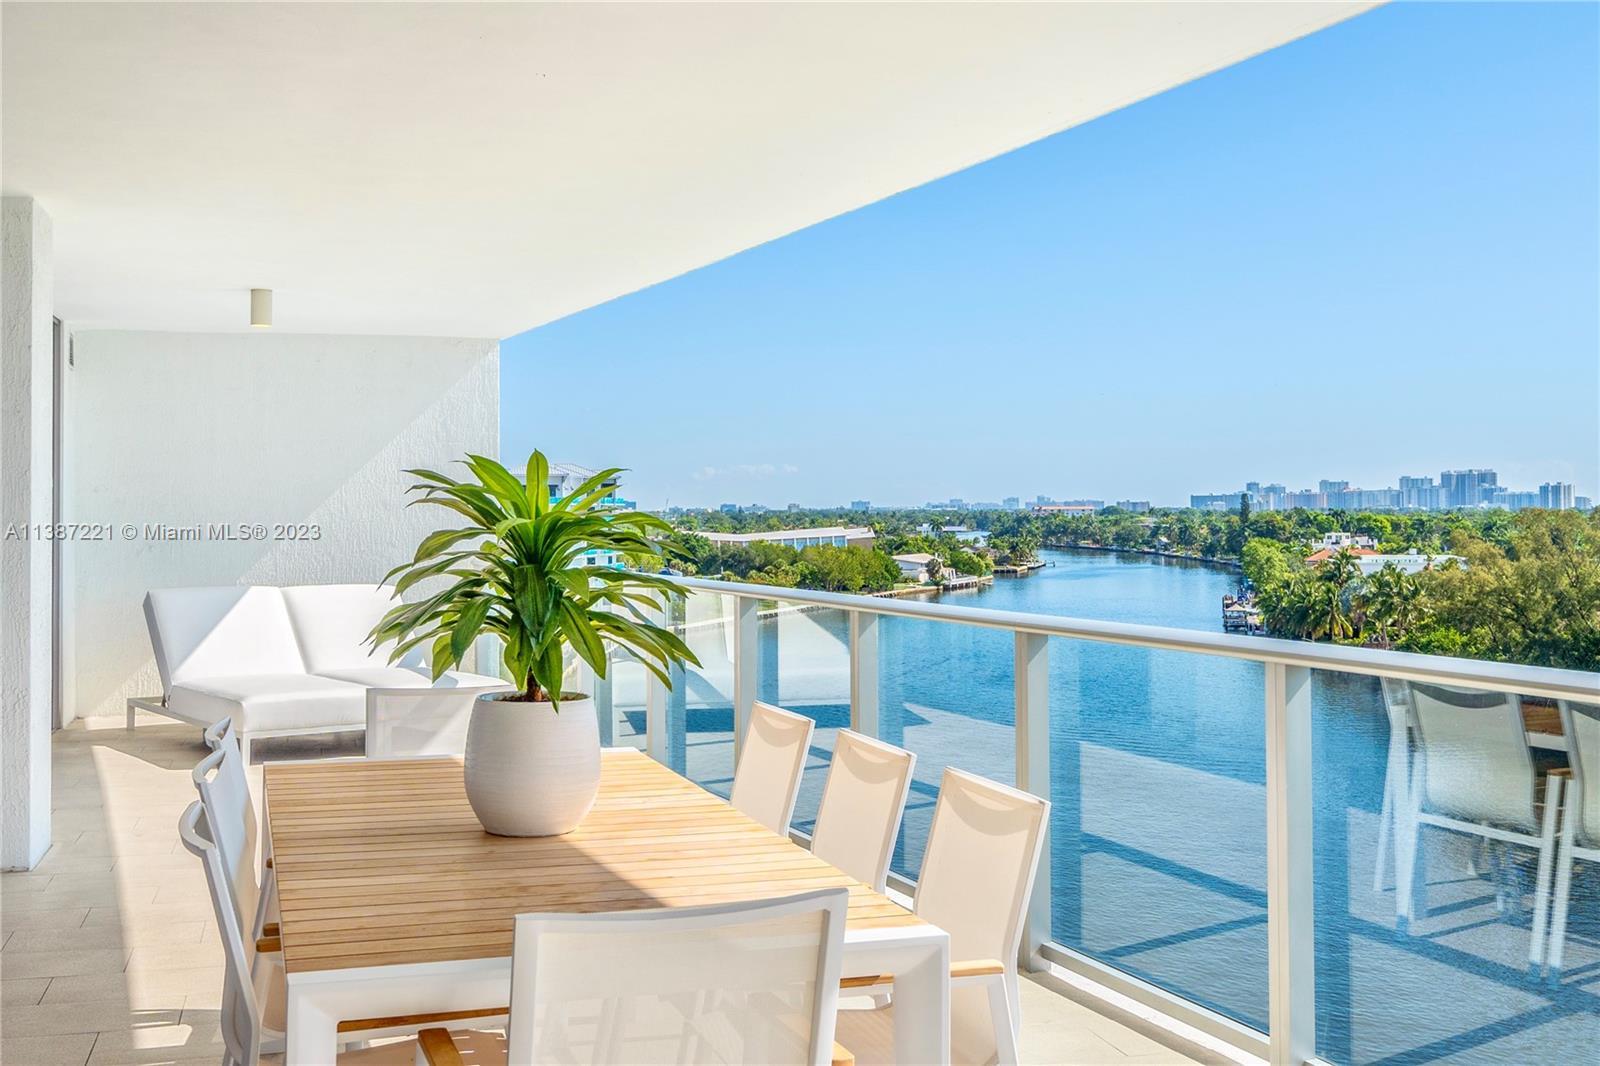 Indulge in the Ultimate Indoor/Outdoor Lifestyle in this Exquisite Waterfront RIVA Residence, Offeri